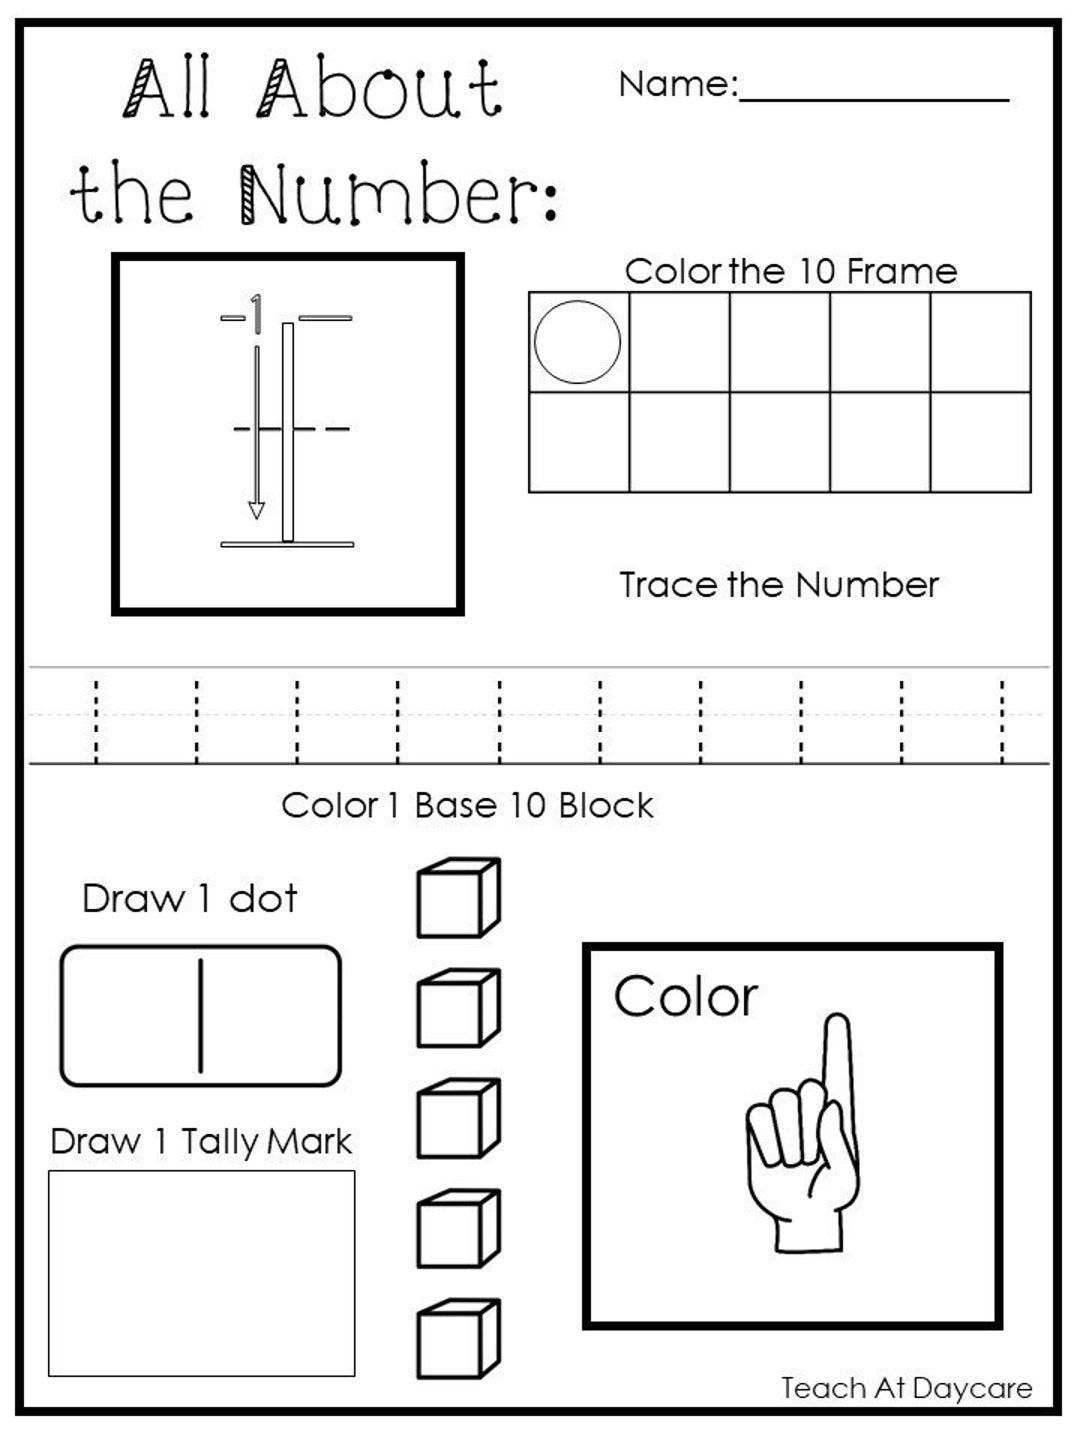 20-printable-all-about-the-numbers-1-20-worksheets-preschool